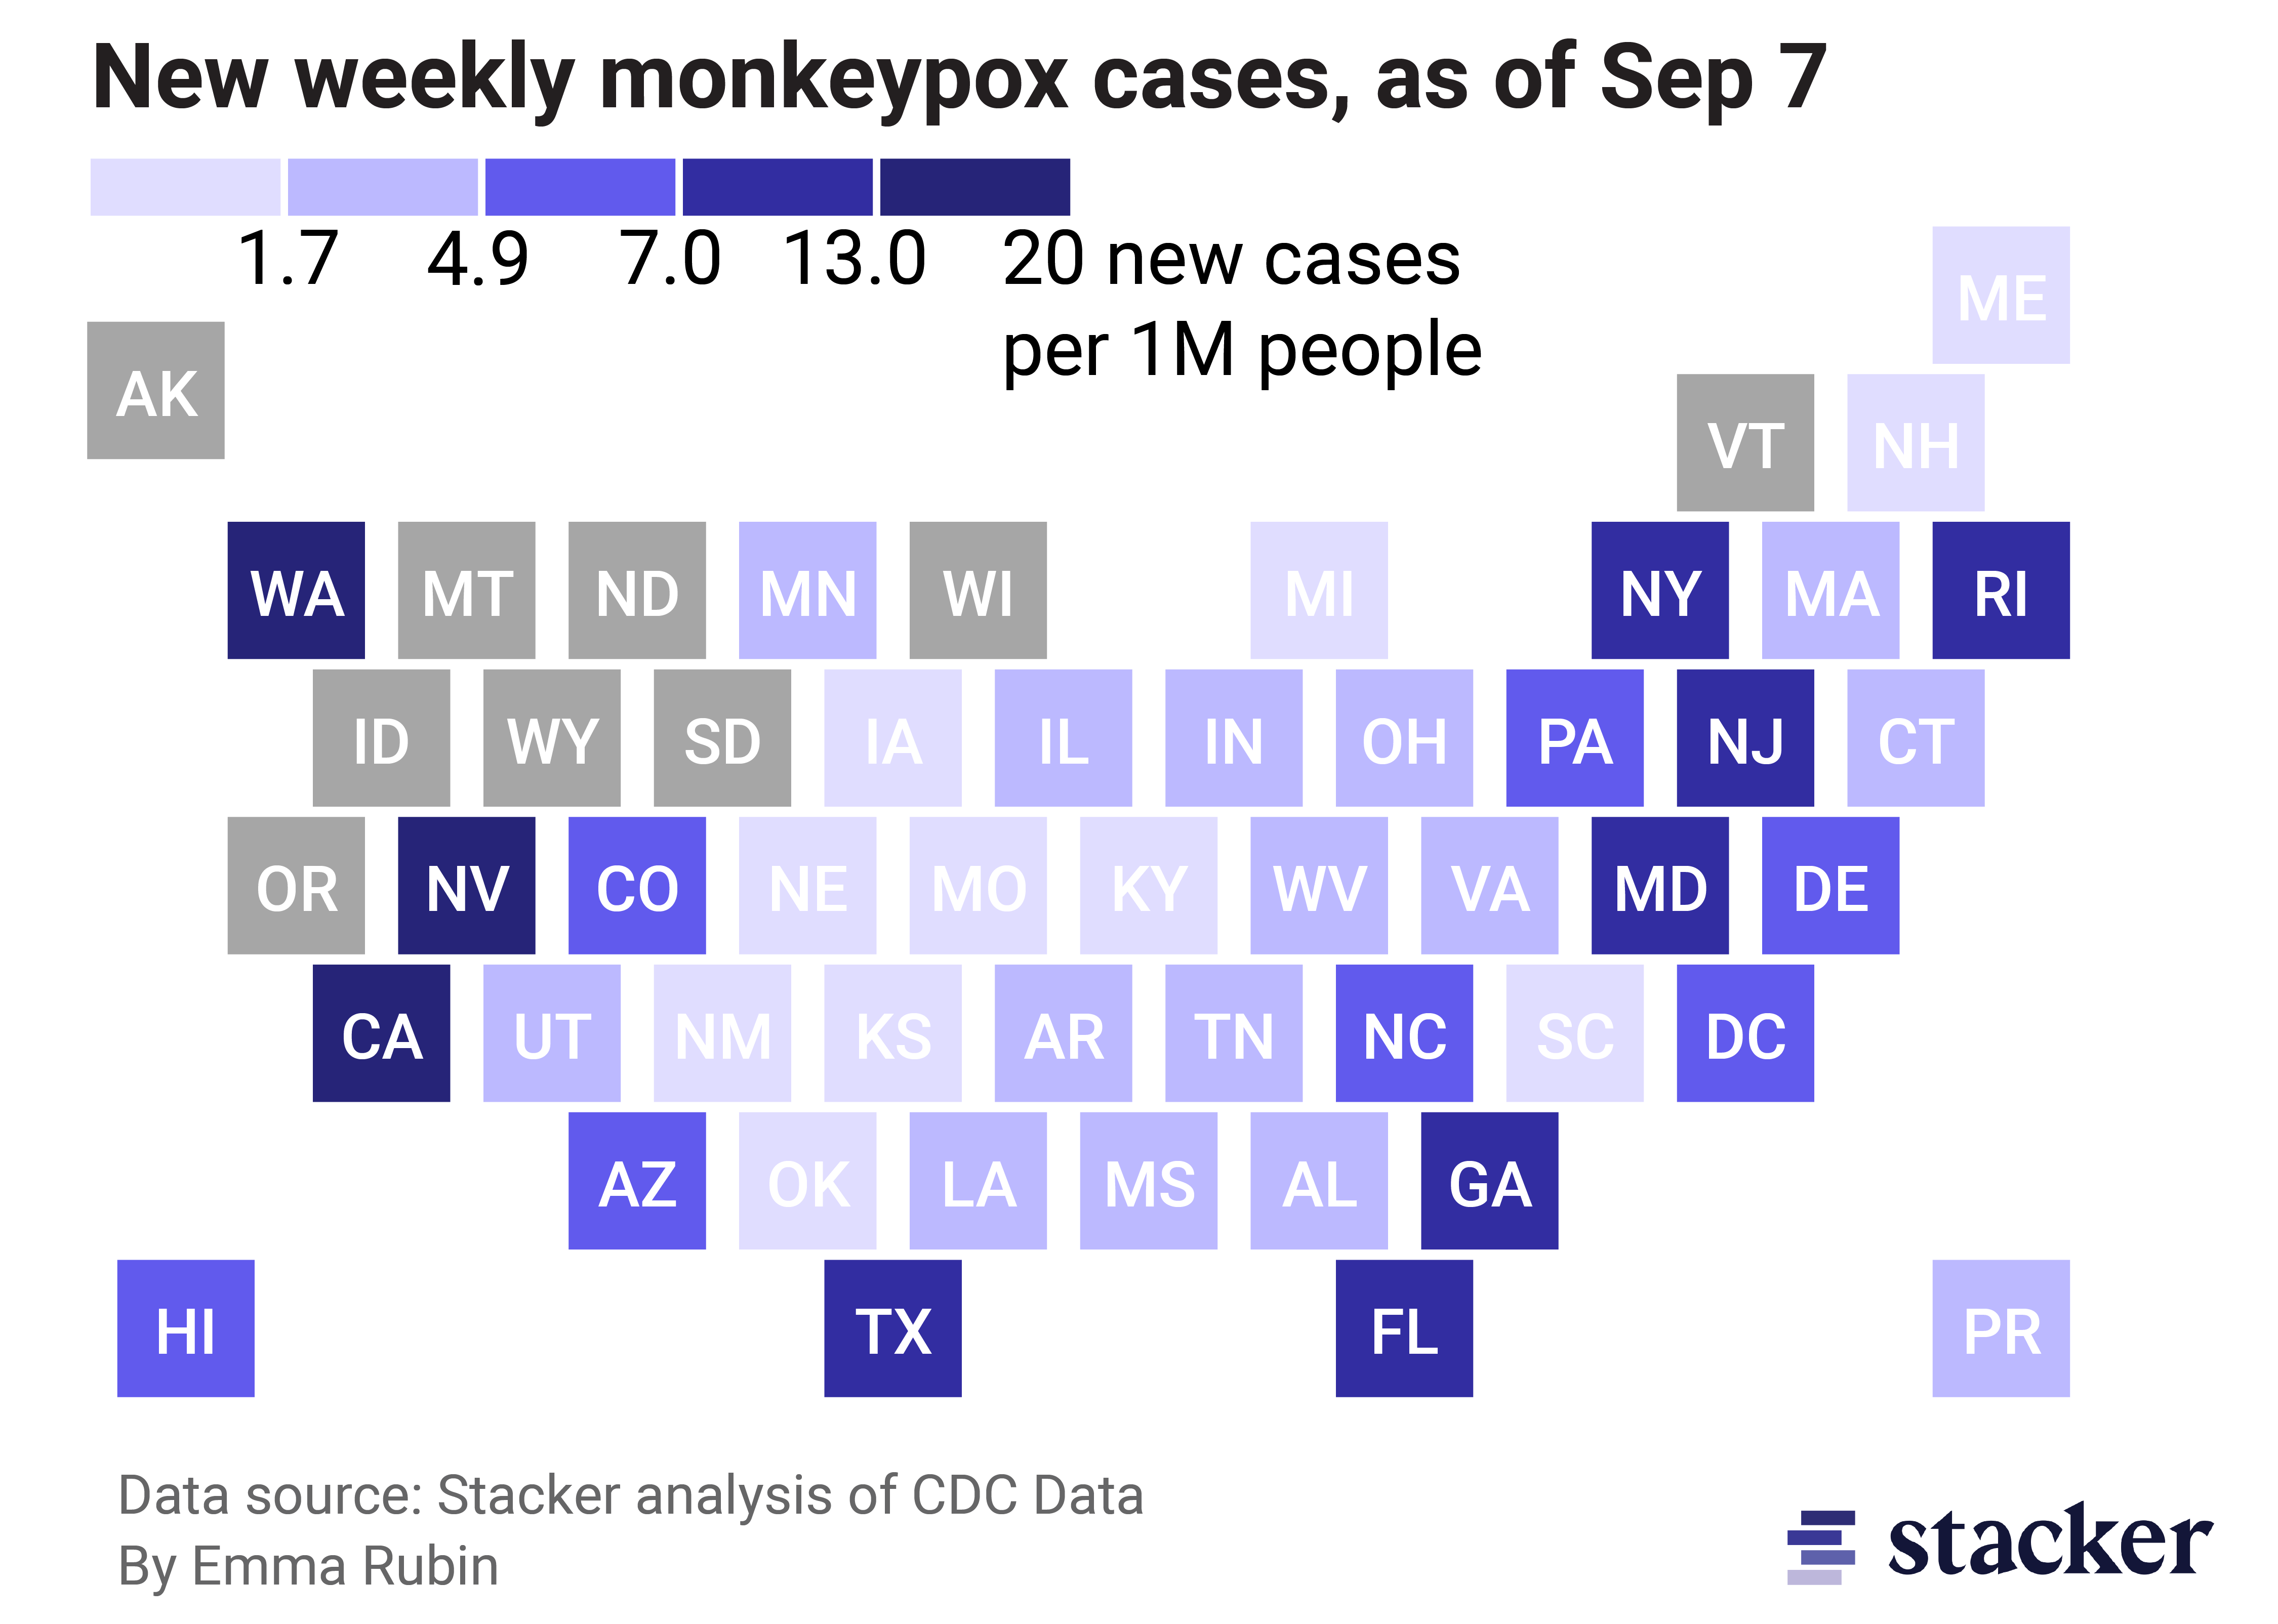 U.S. map depicting weekly monkeypox cases by state as of September 7, 2022